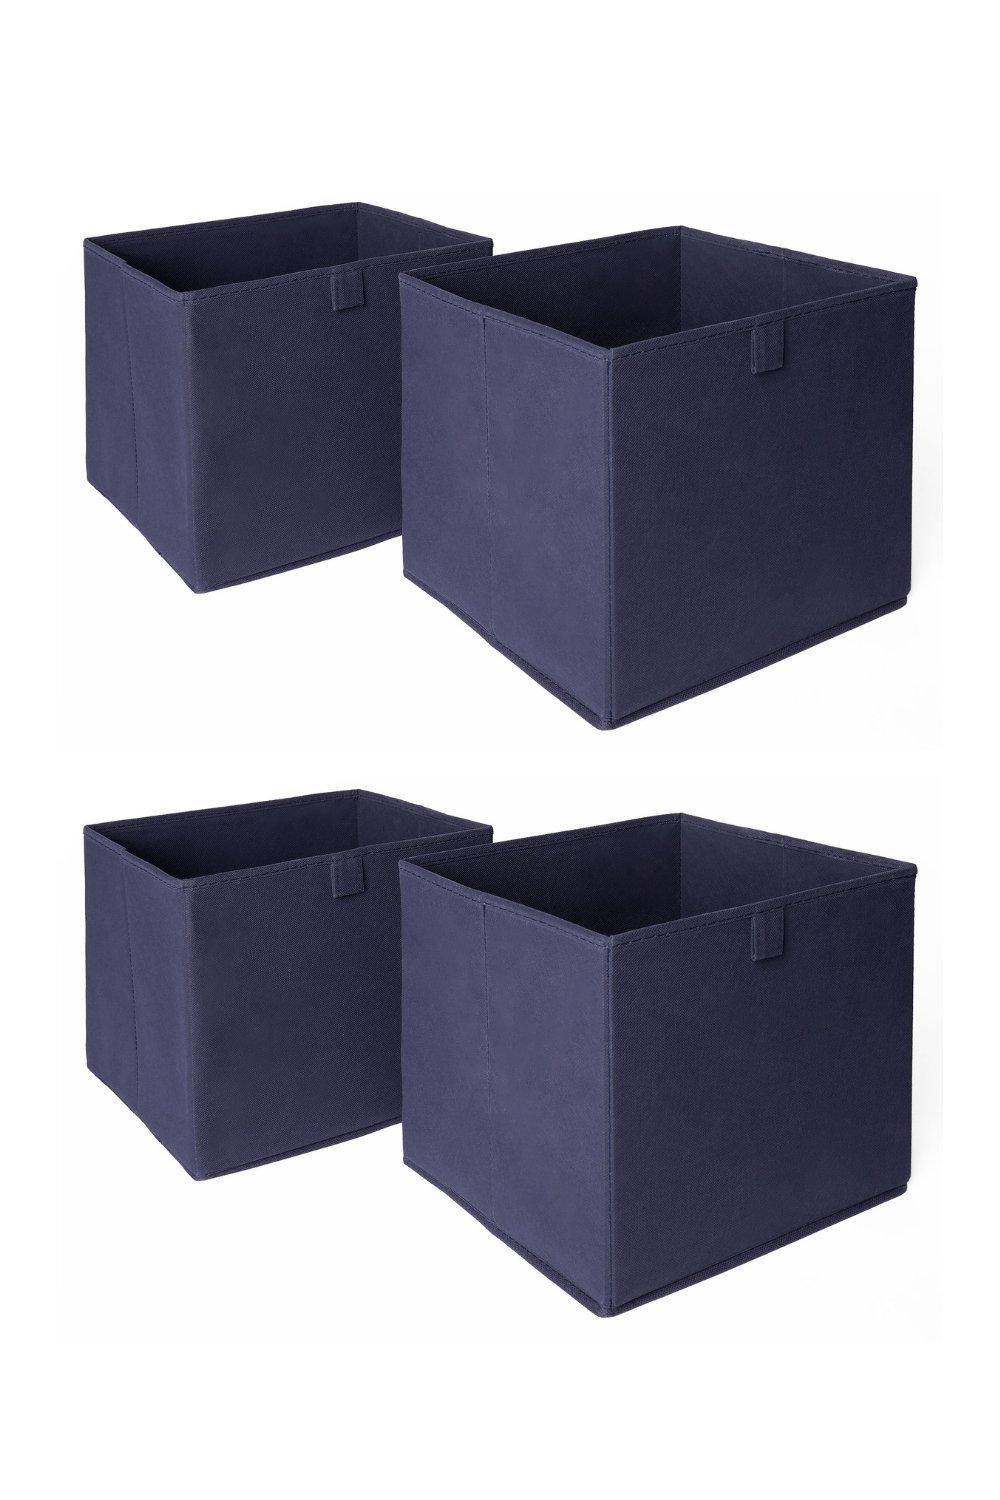 OHS Pack of 4 Plain Folding Cube Storage Boxes|navy